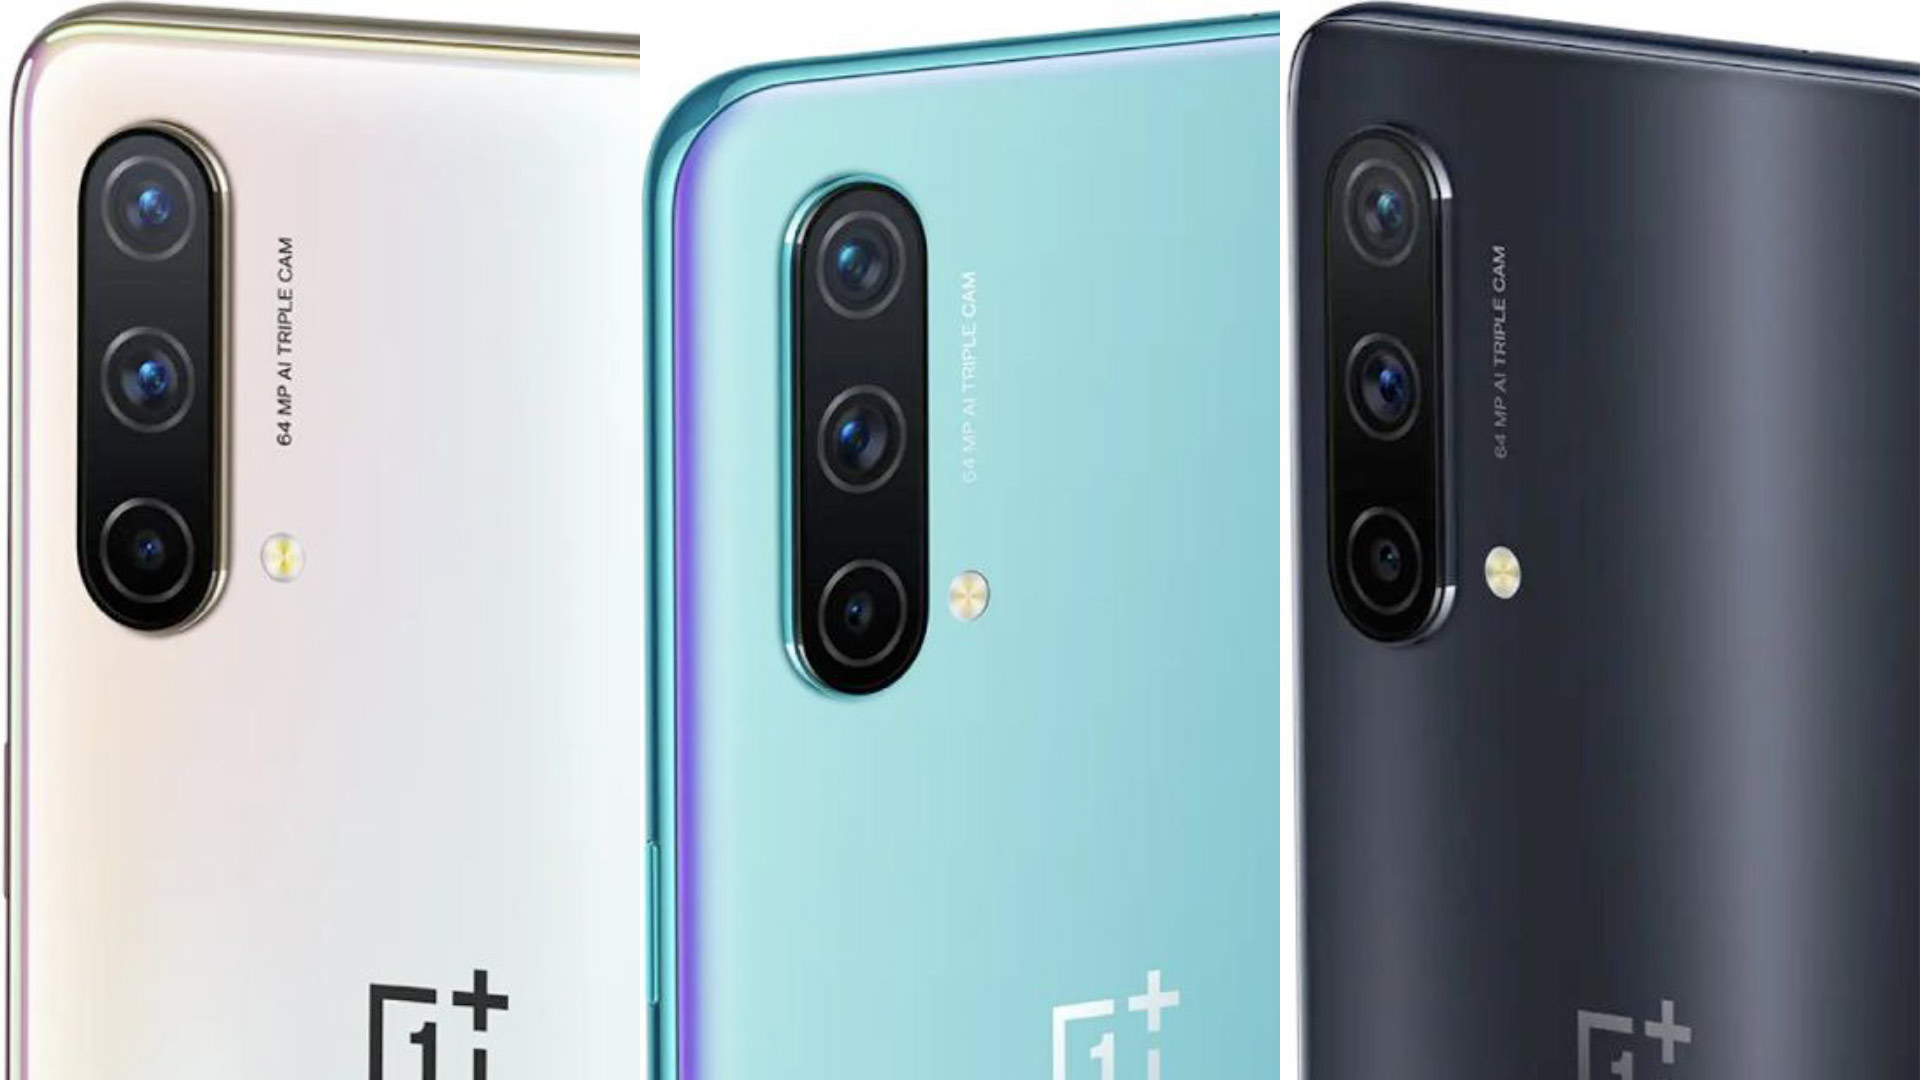 Nord specs oneplus ce 5g OnePlus Nord